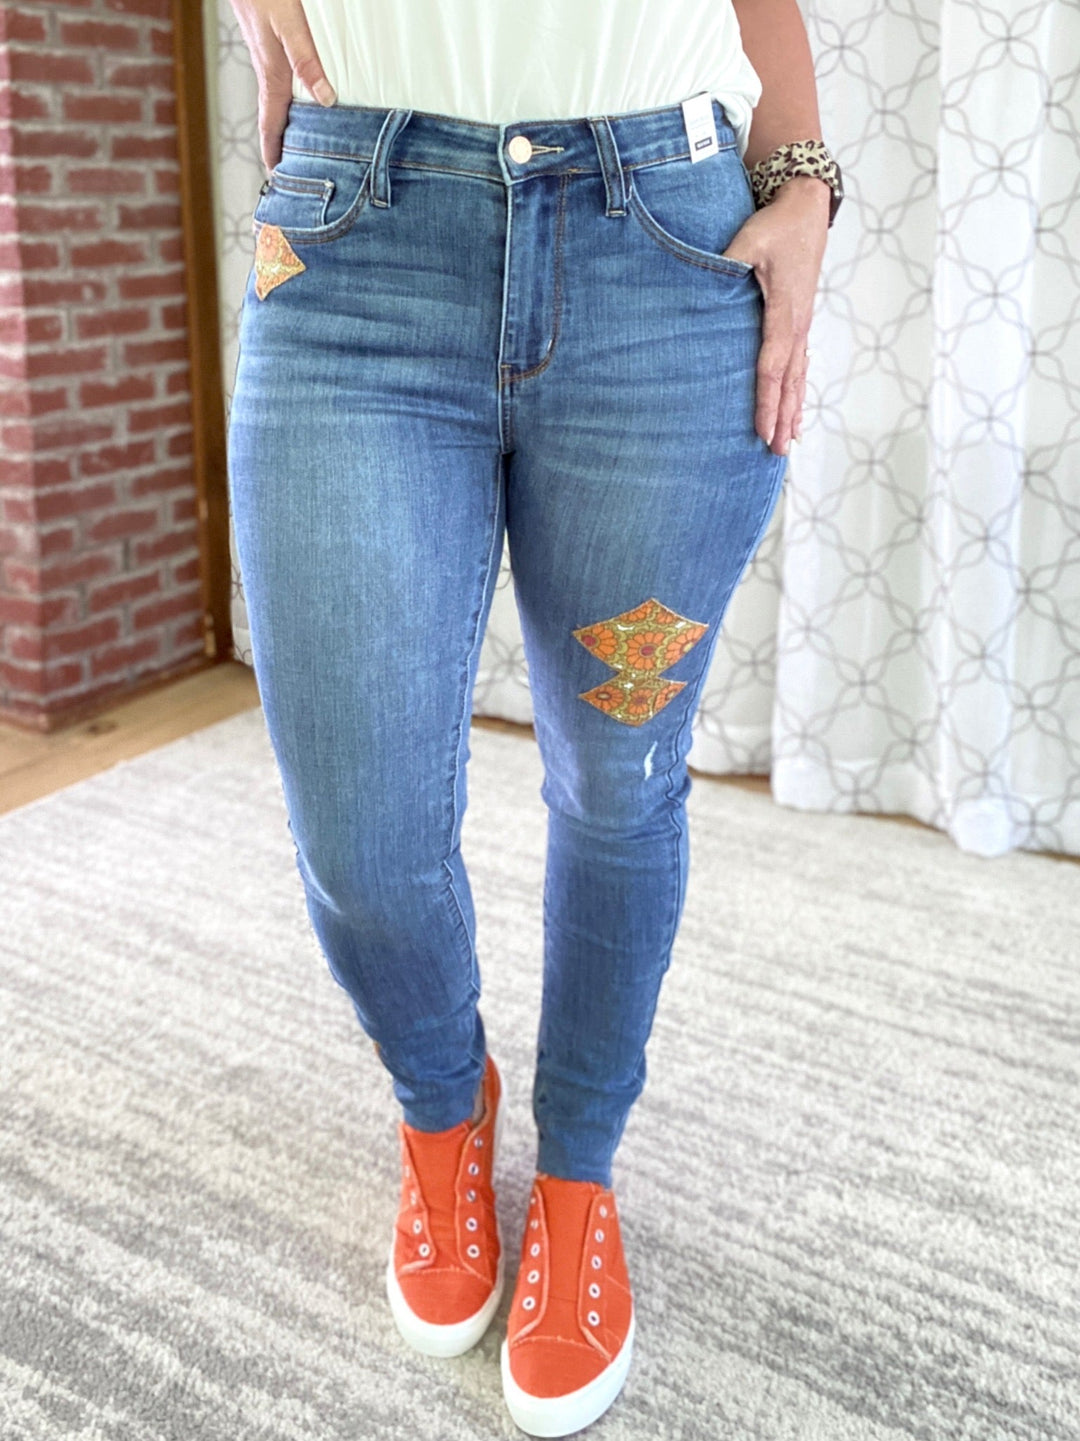 Retro Vibes Judy Blue Patch Skinny Jeans-judy blue-Inspired by Justeen-Women's Clothing Boutique in Chicago, Illinois